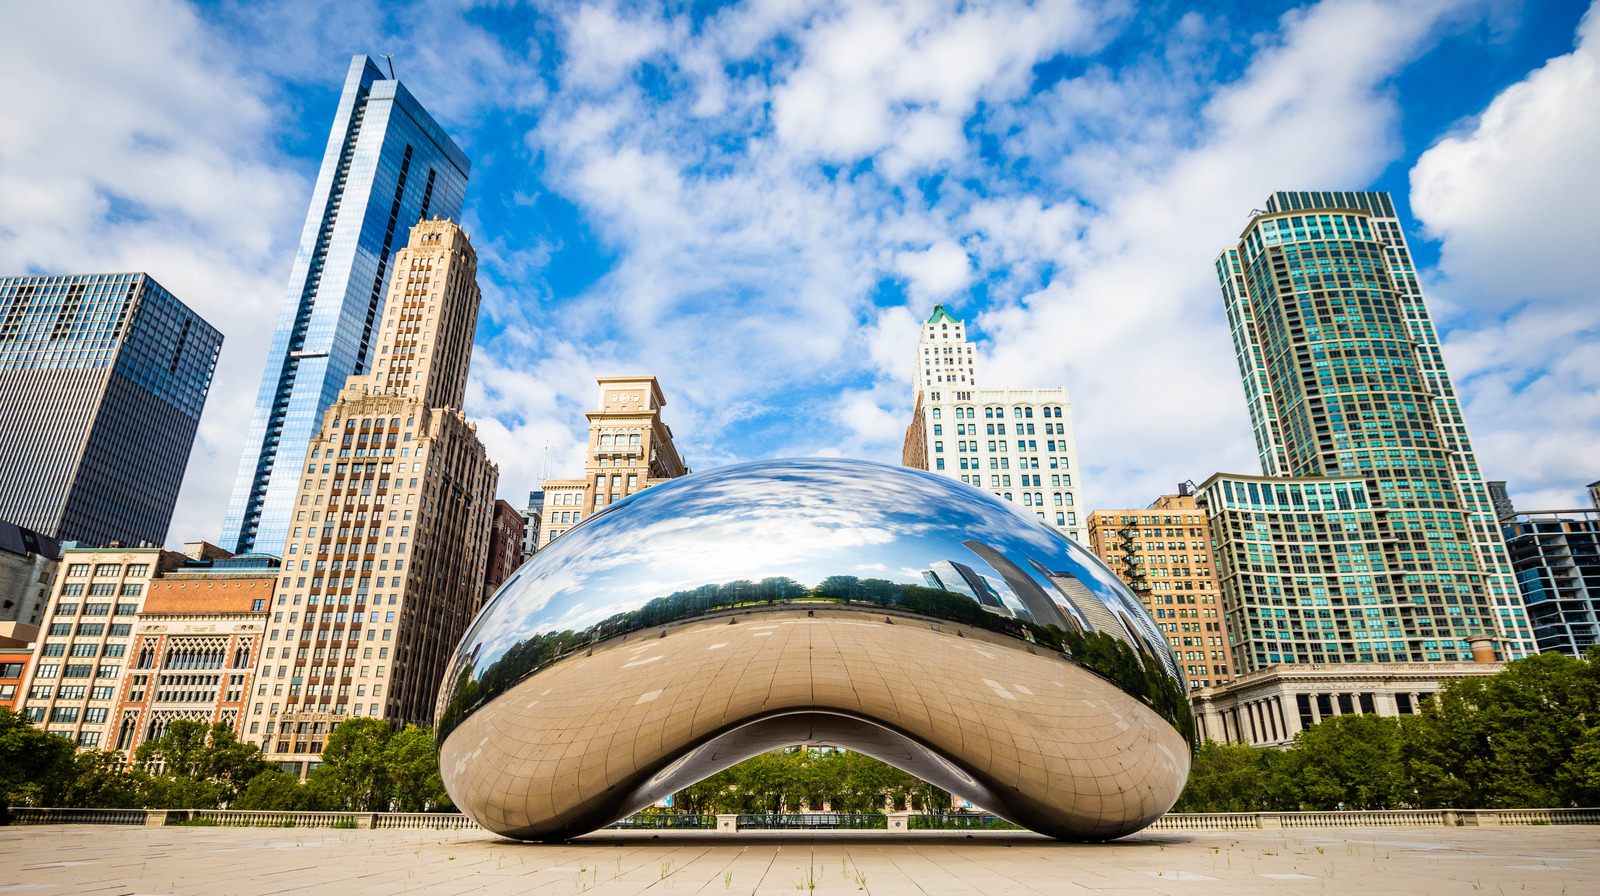 The Best Museums To Visit When Traveling To Chicago – Explore